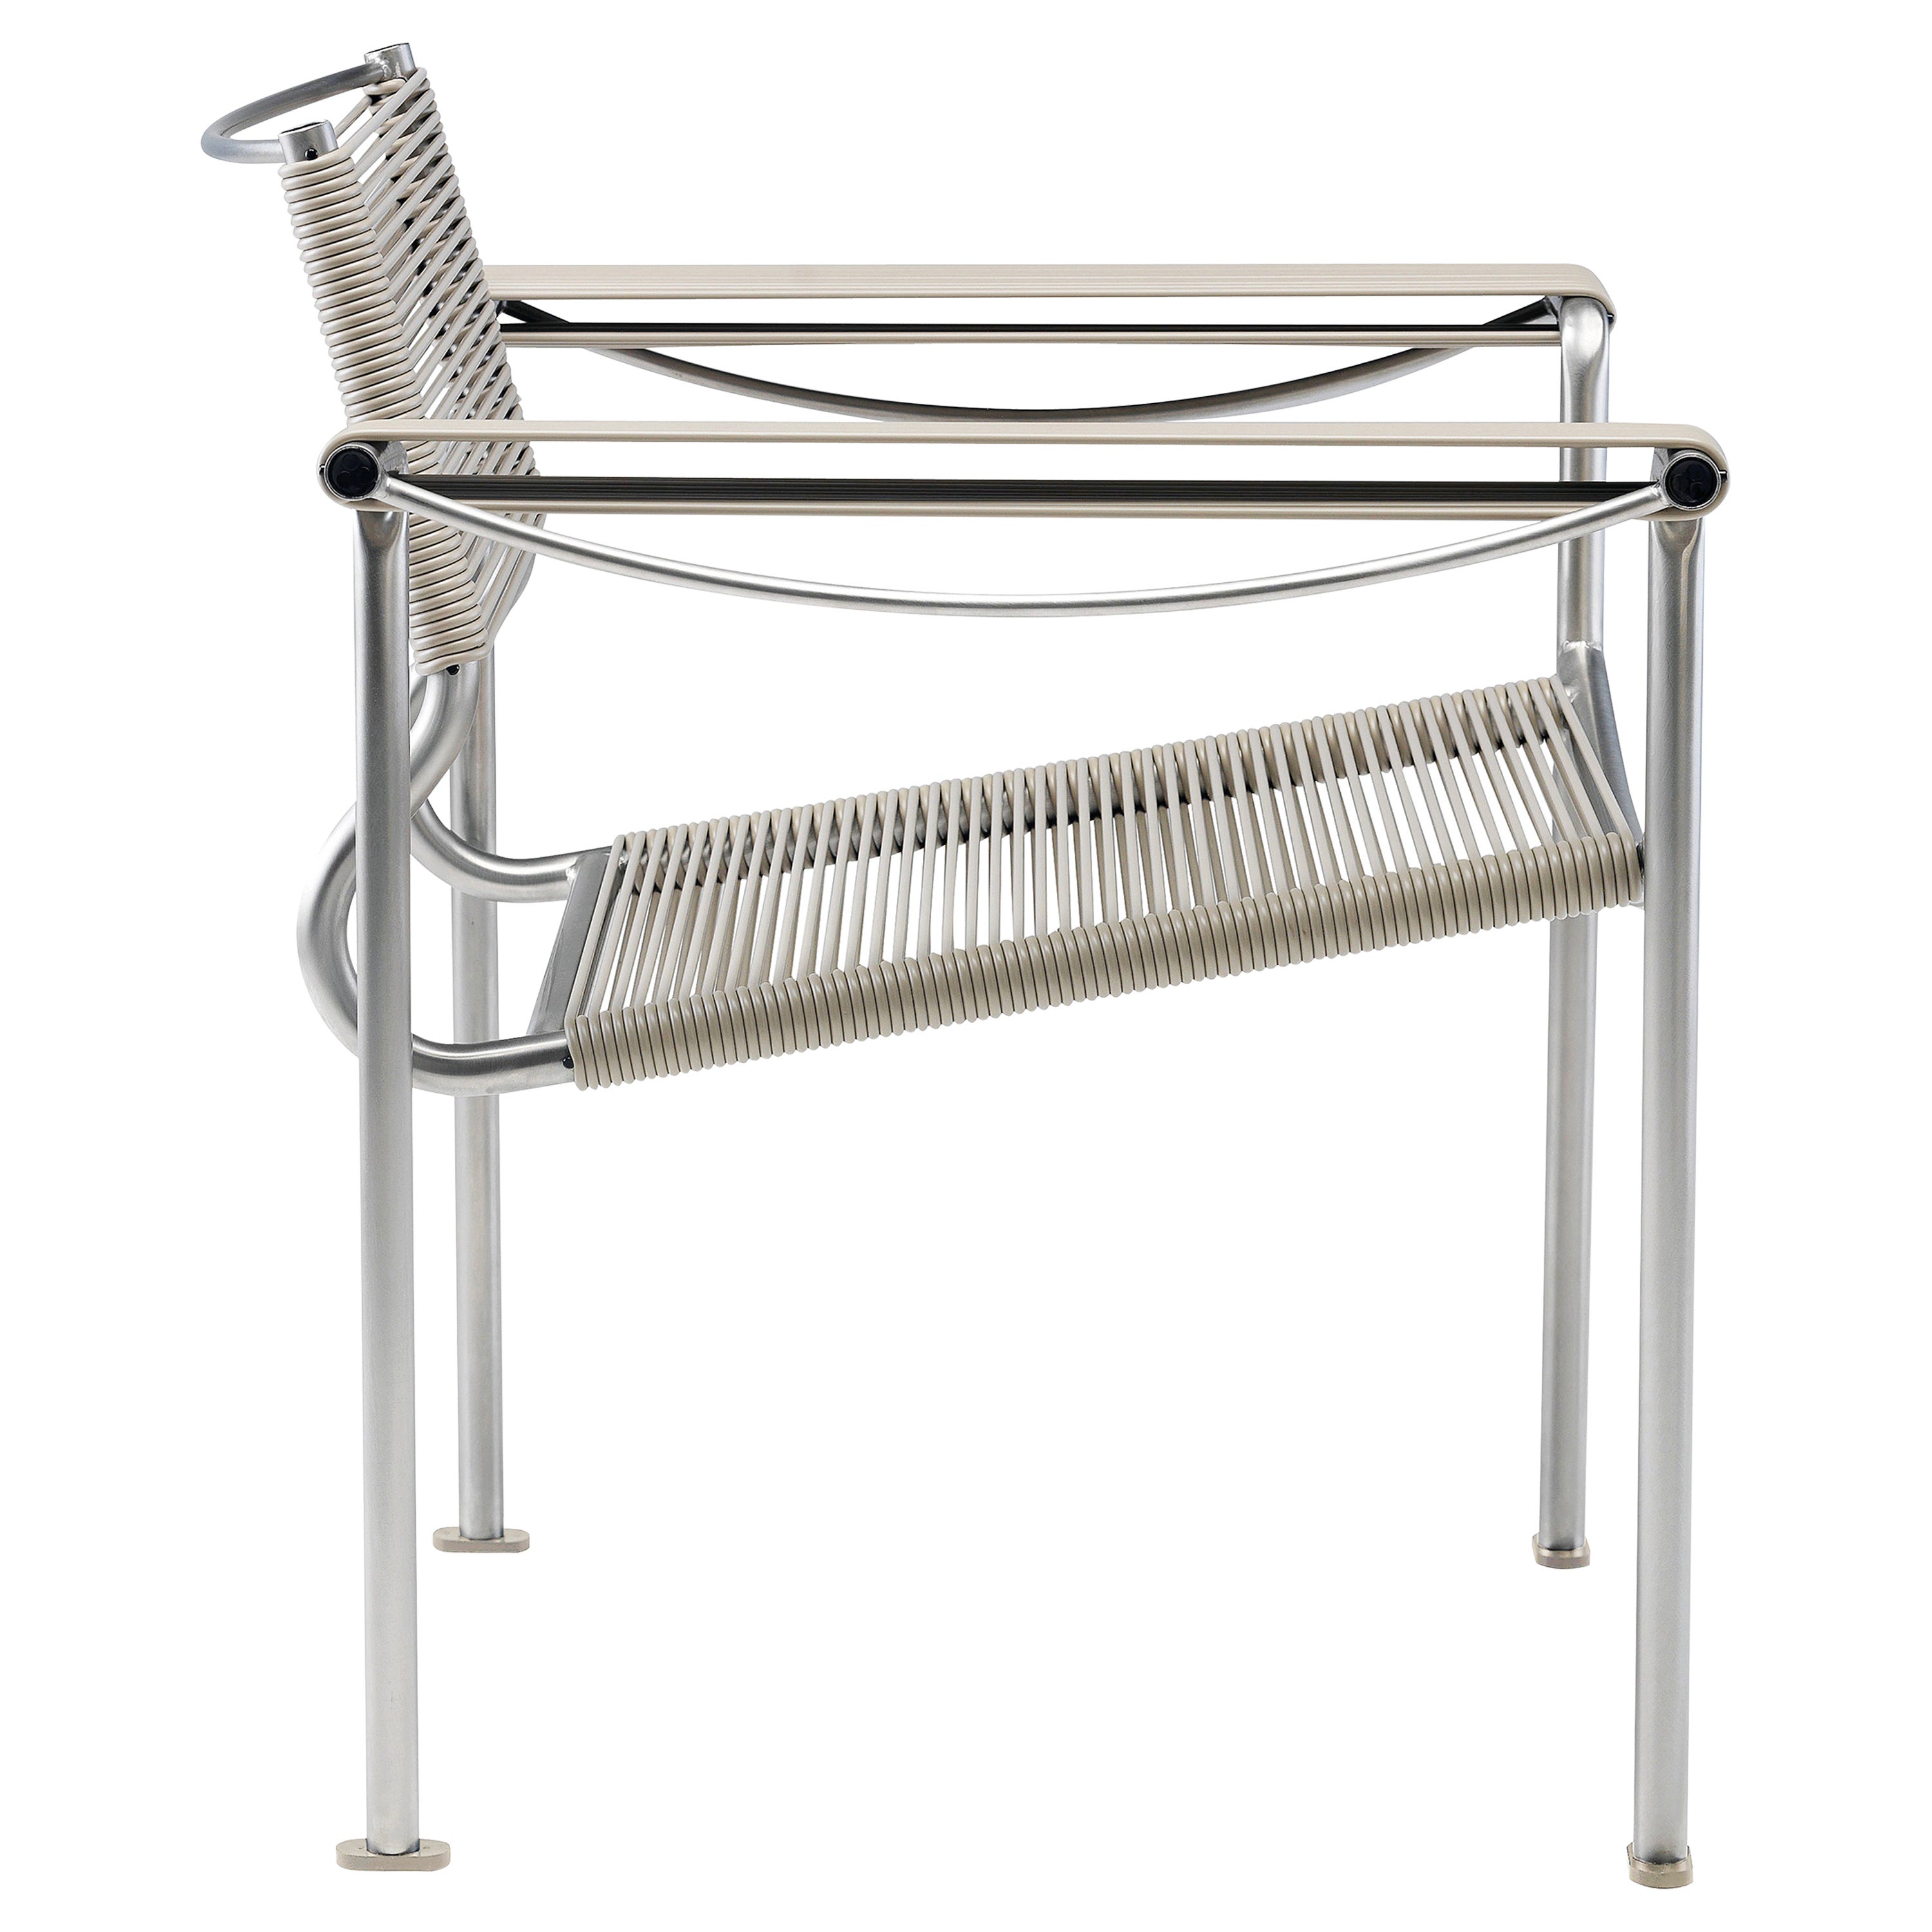 Alias 202 Outdoor Green PVC Armchair in Brushed Stainless Steel Frame